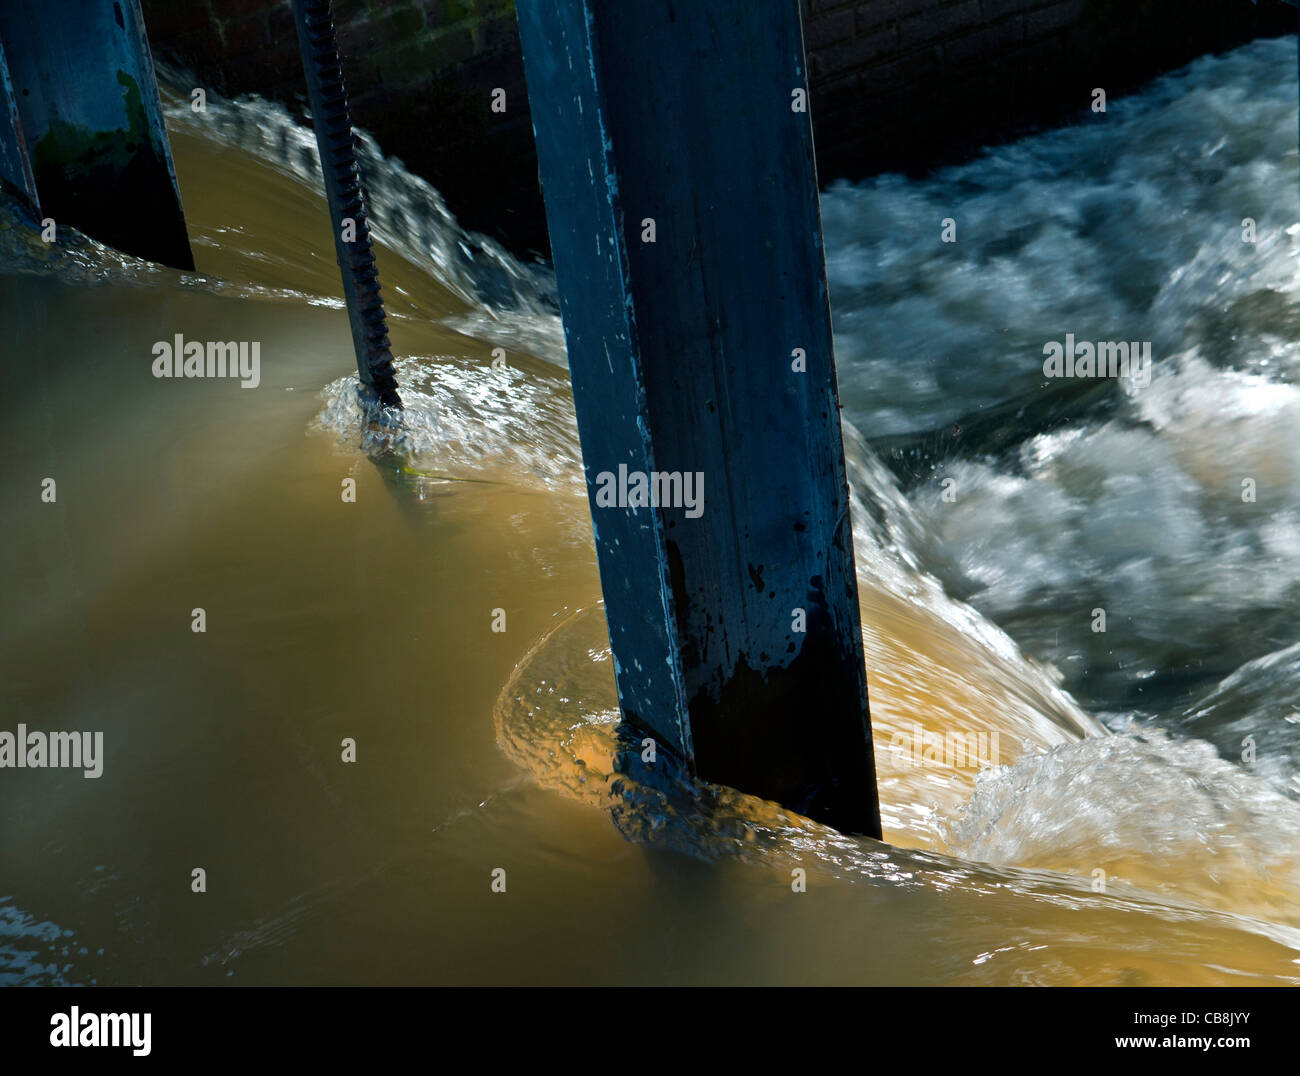 WATER FLOWING WEIR River in flood after recent heavy rainfall with brackish water flowing over a weir Stock Photo